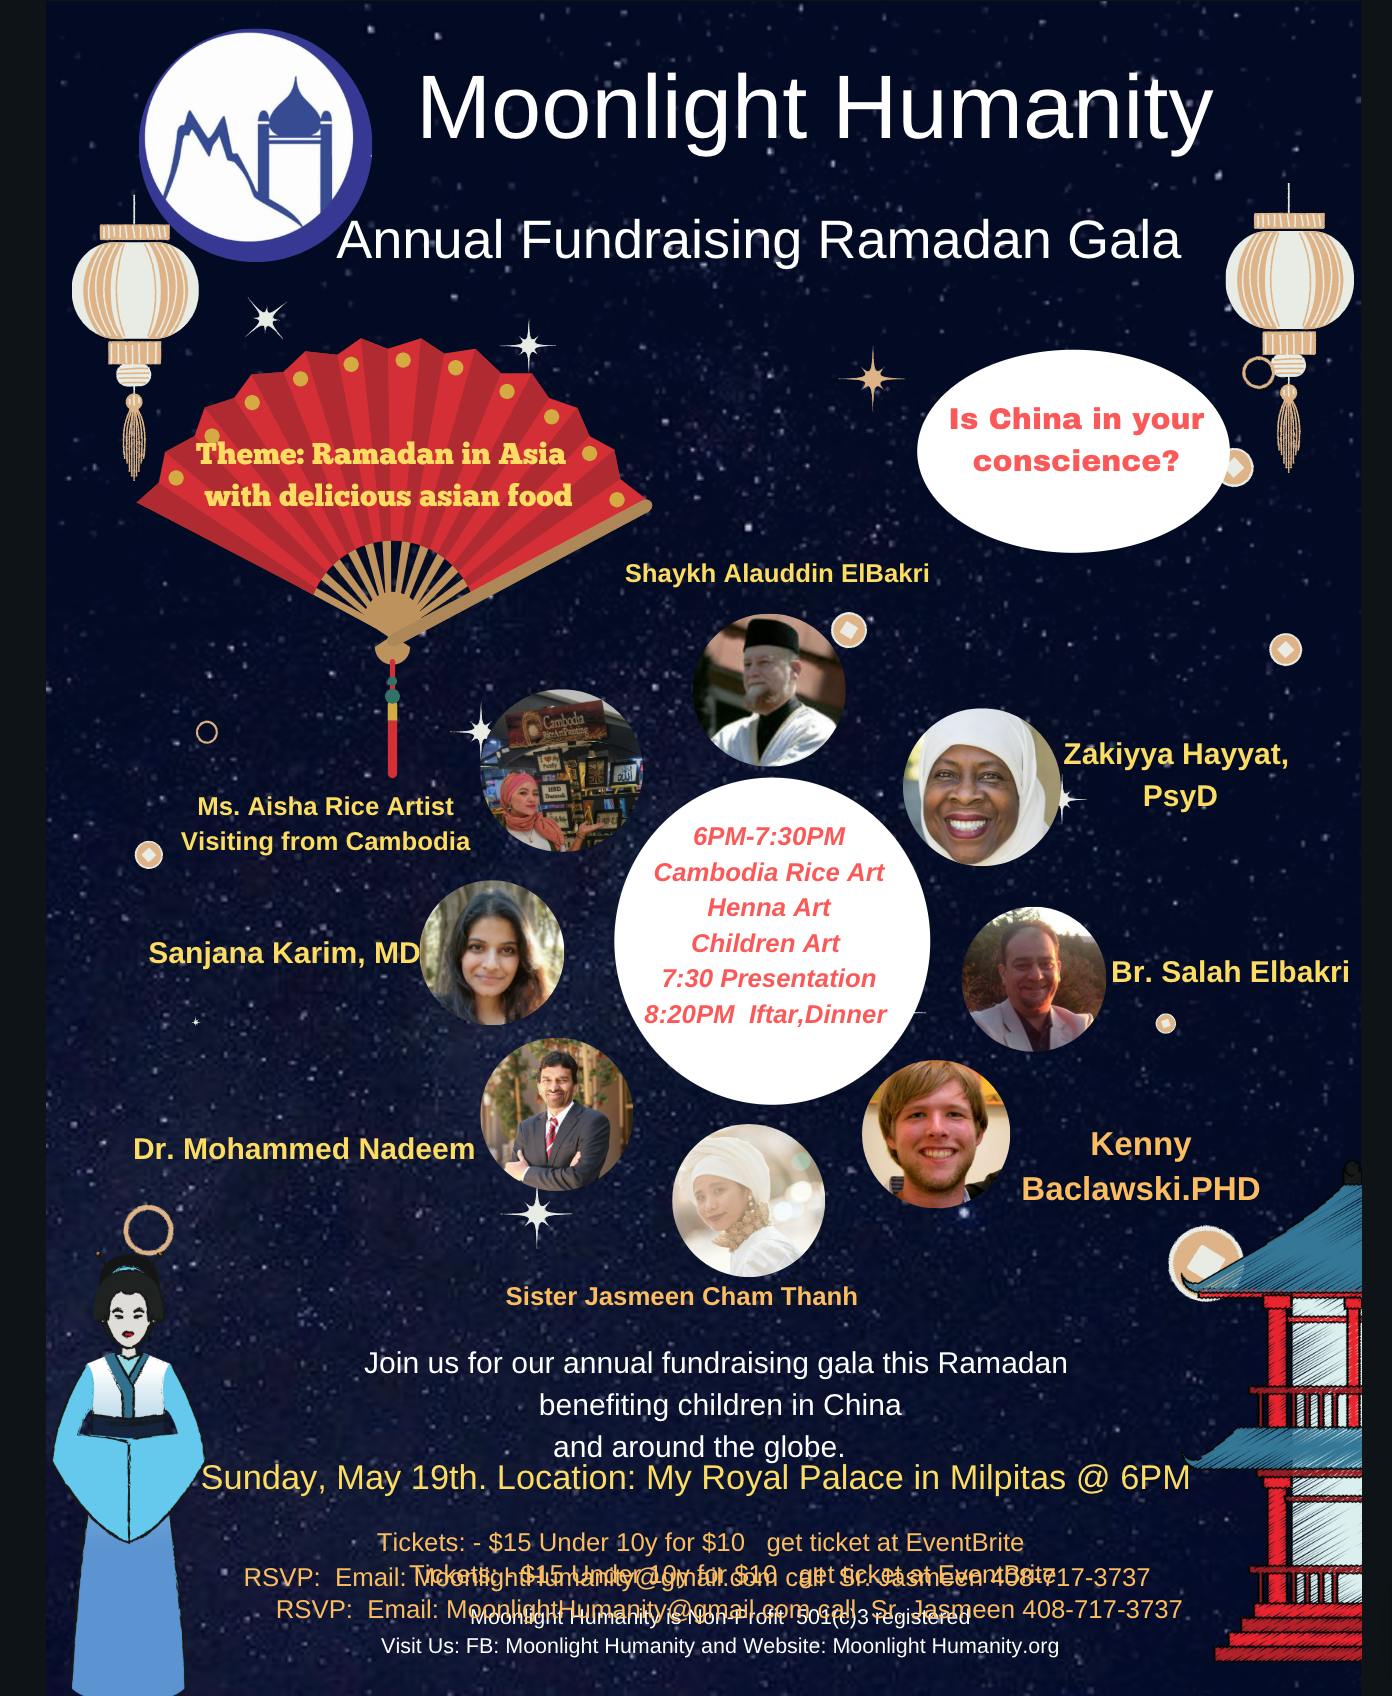 1 more day to Moonlight Humanity 10th Annual Fundraising Ramadan Gala